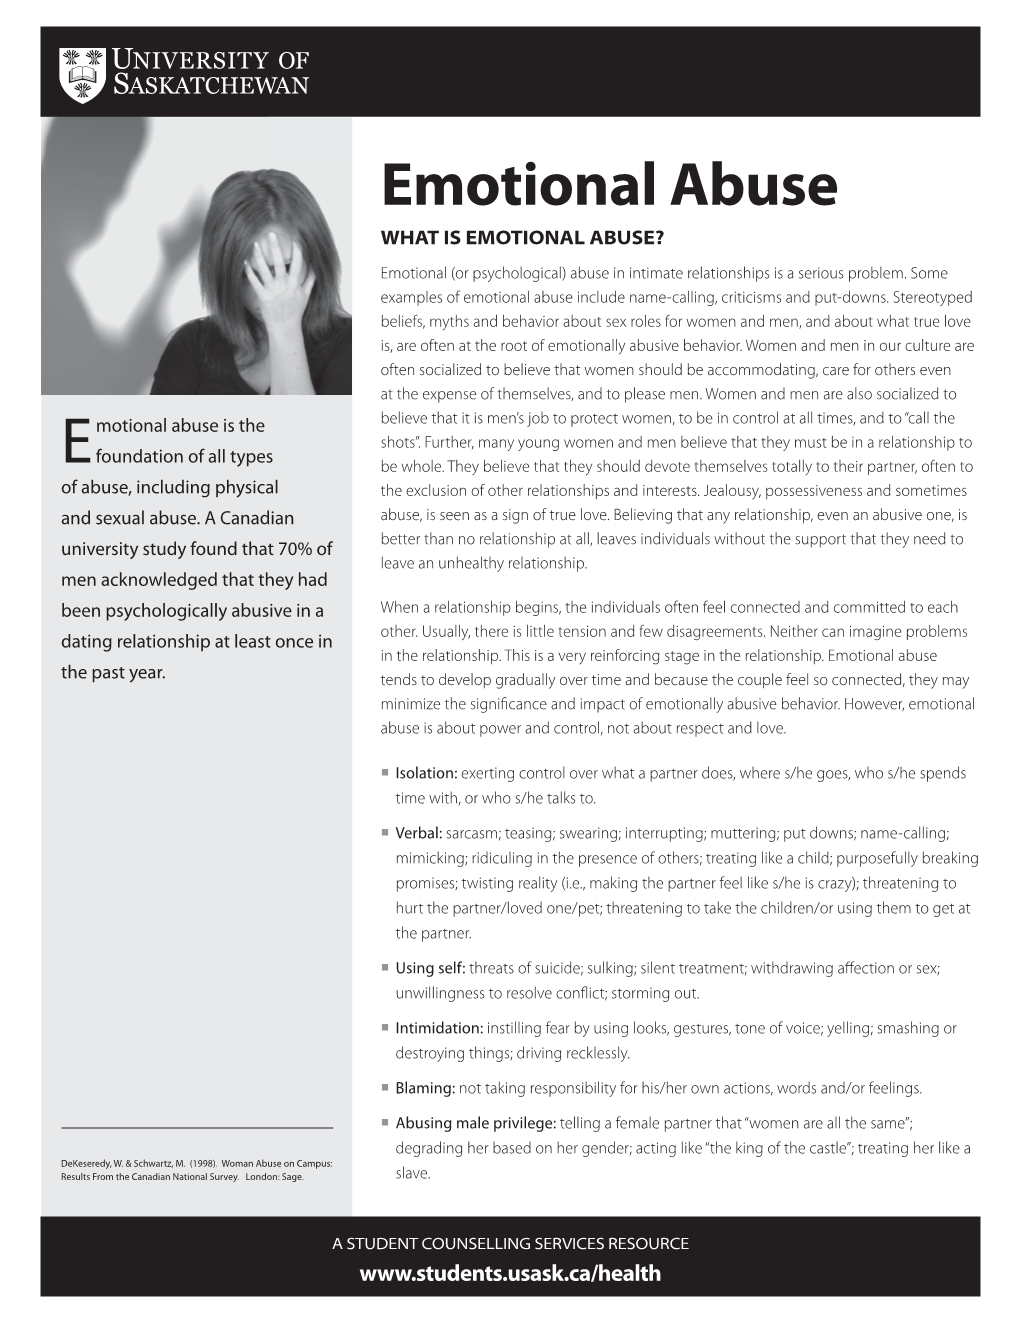 Emotional Abuse WHAT IS EMOTIONAL ABUSE? Emotional (Or Psychological) Abuse in Intimate Relationships Is a Serious Problem